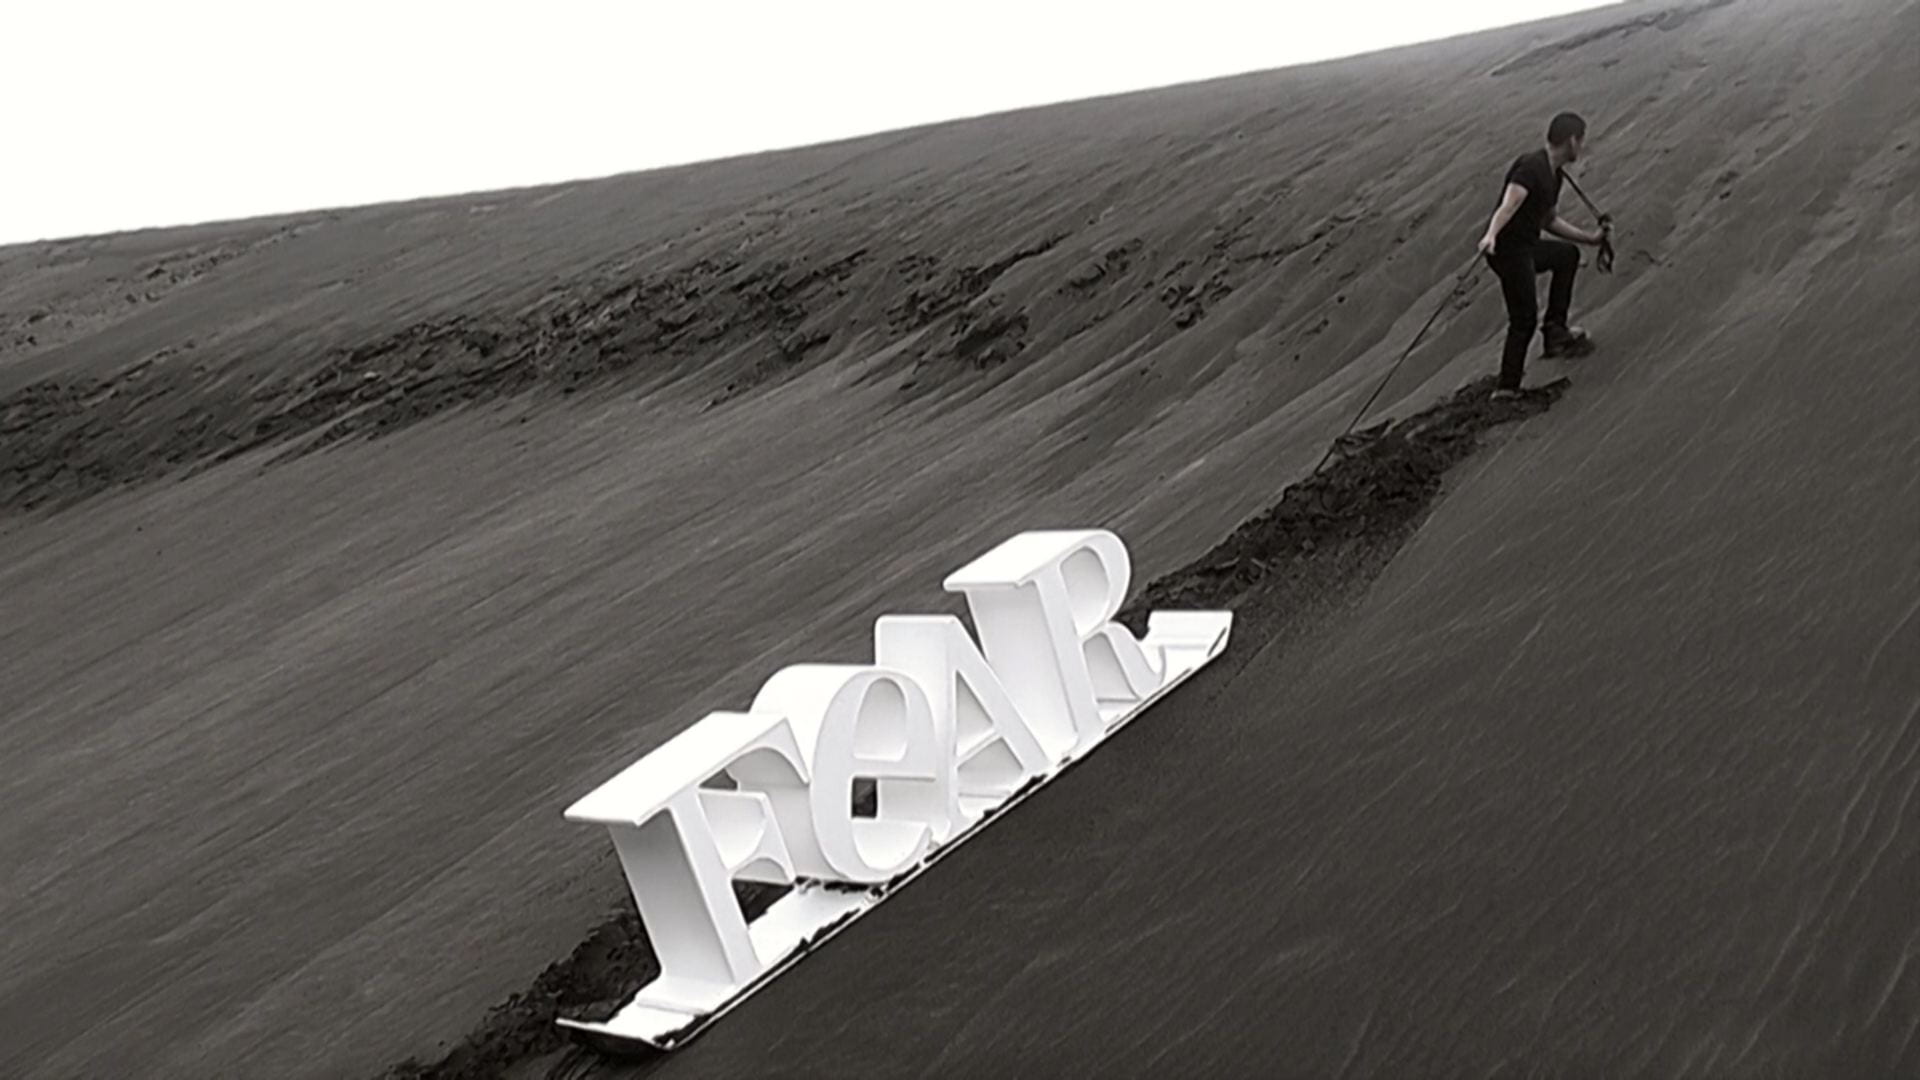 A man drags a white sled up a tall black sand dune. The sled has giant 3D white letters on it spelling 'FEAR'